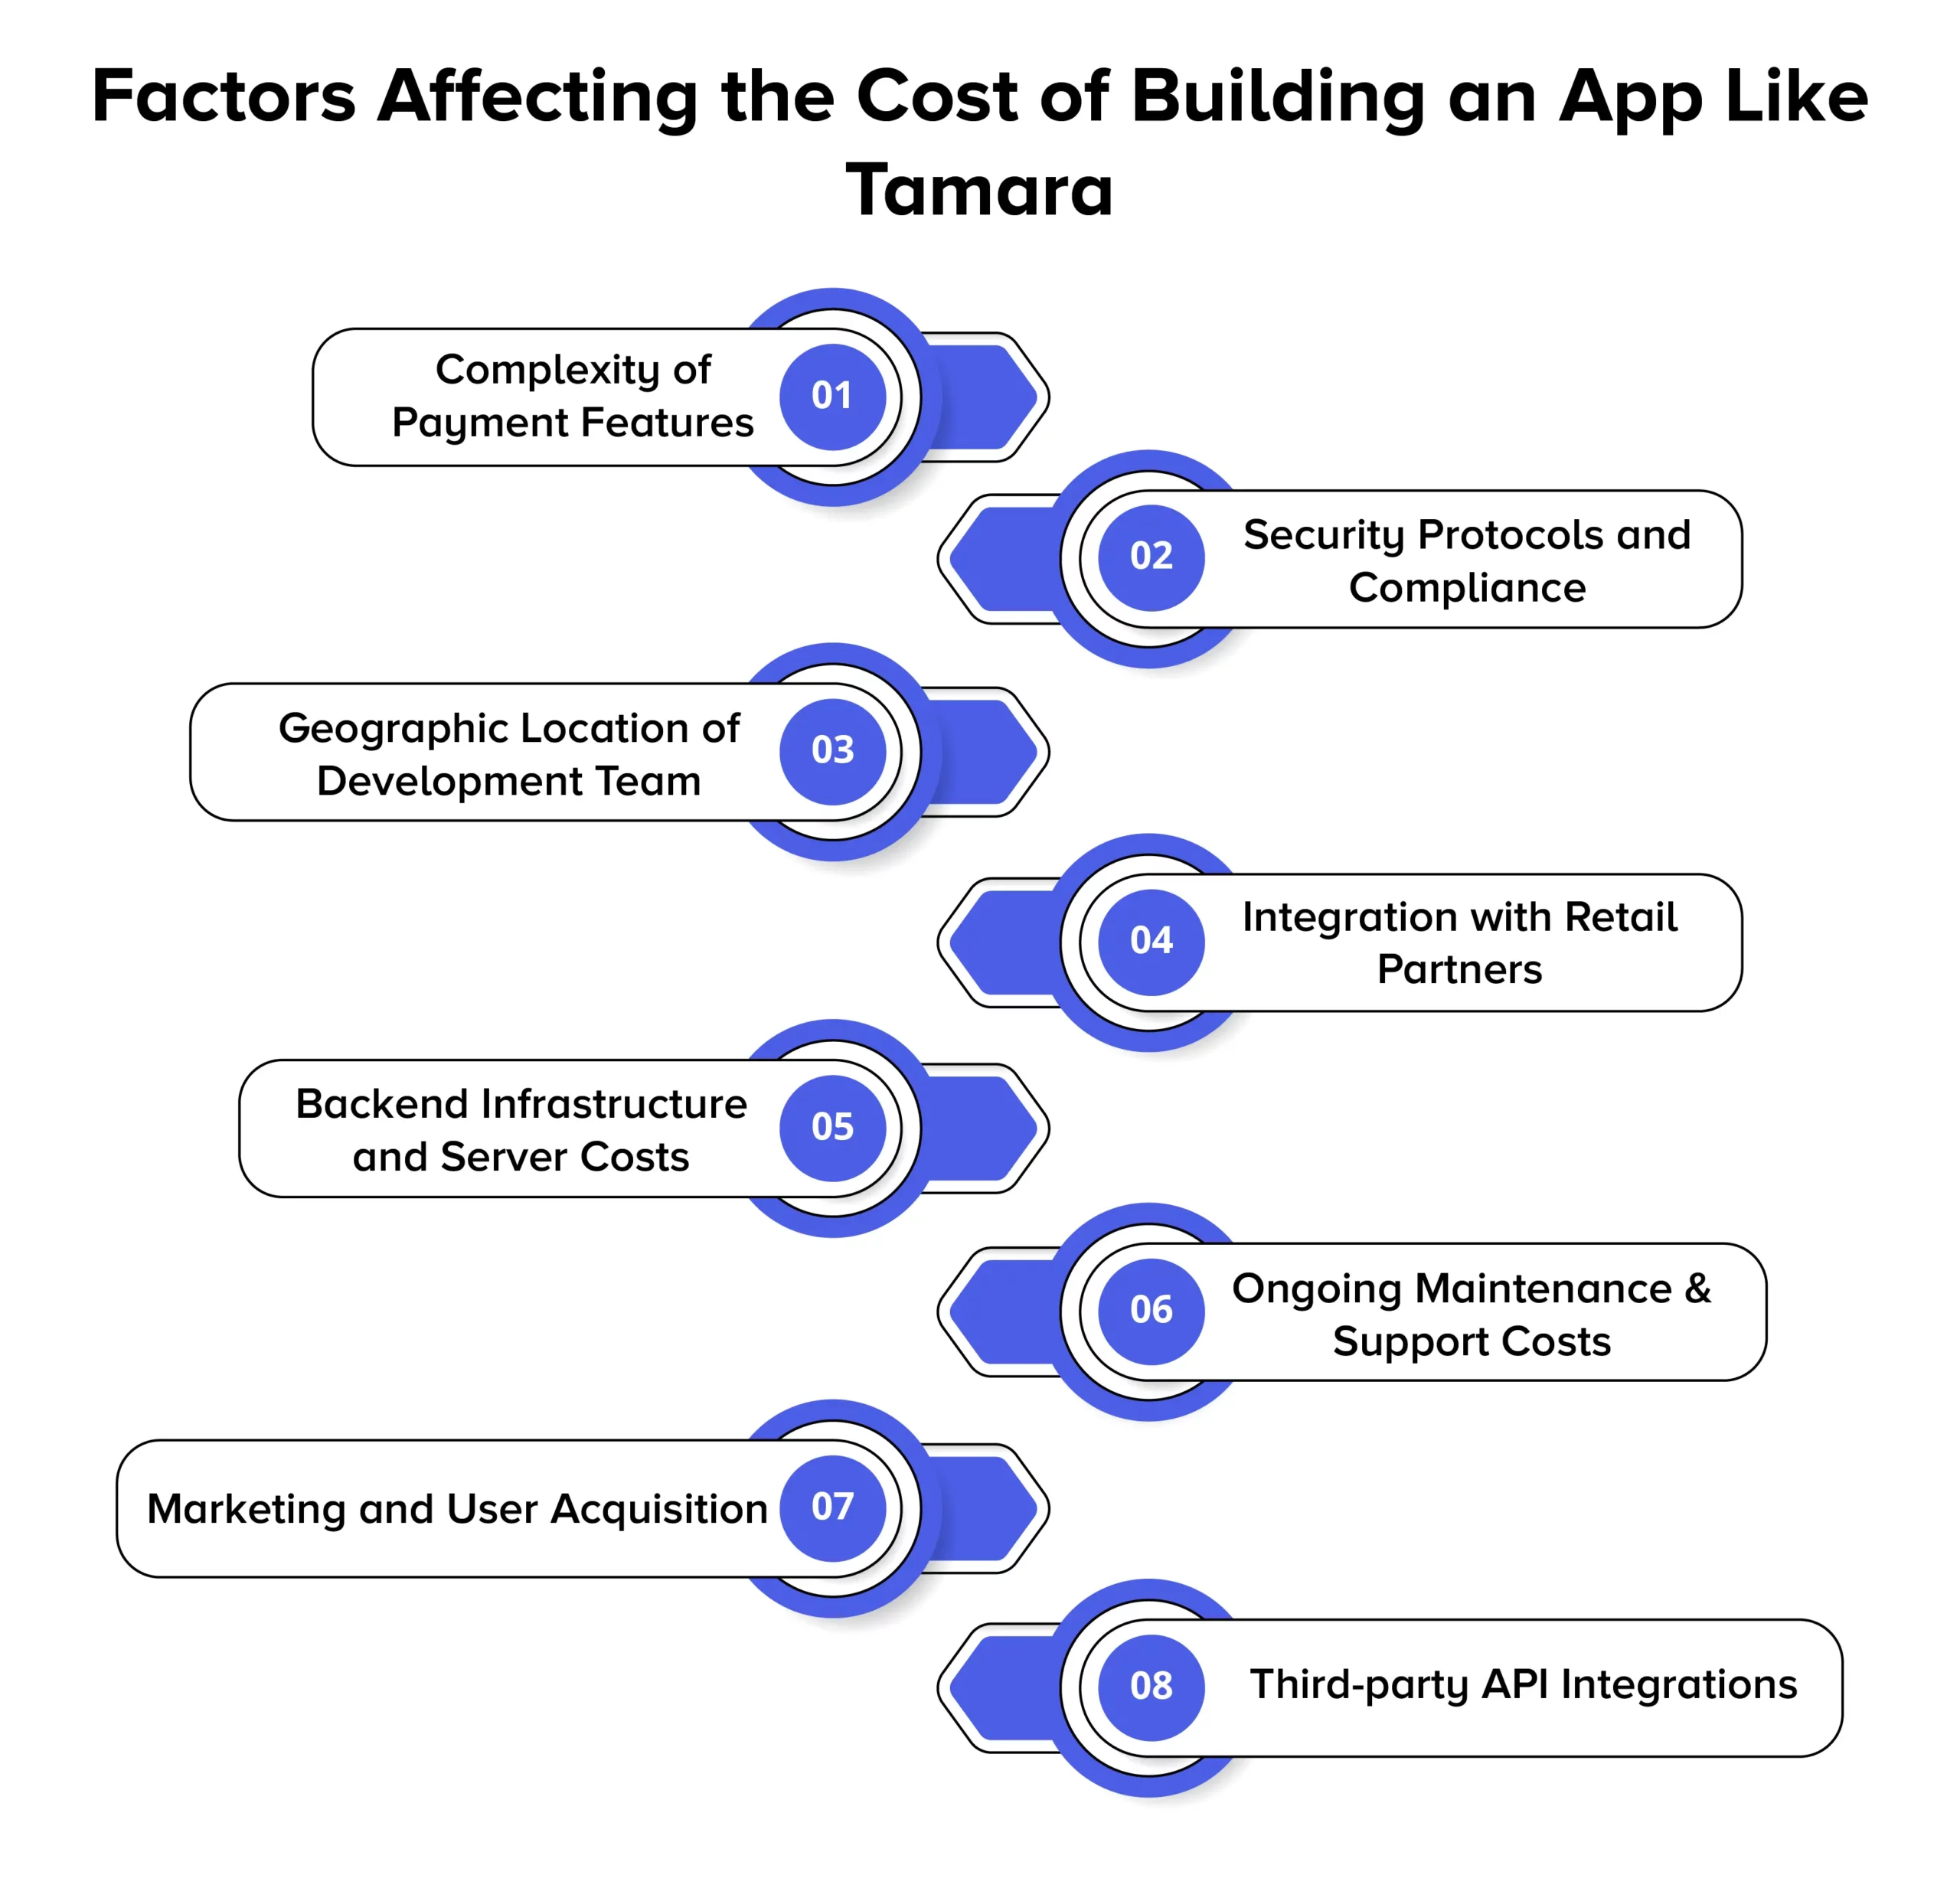 Major Factors Determining the Cost to Develop an App Like Tamara